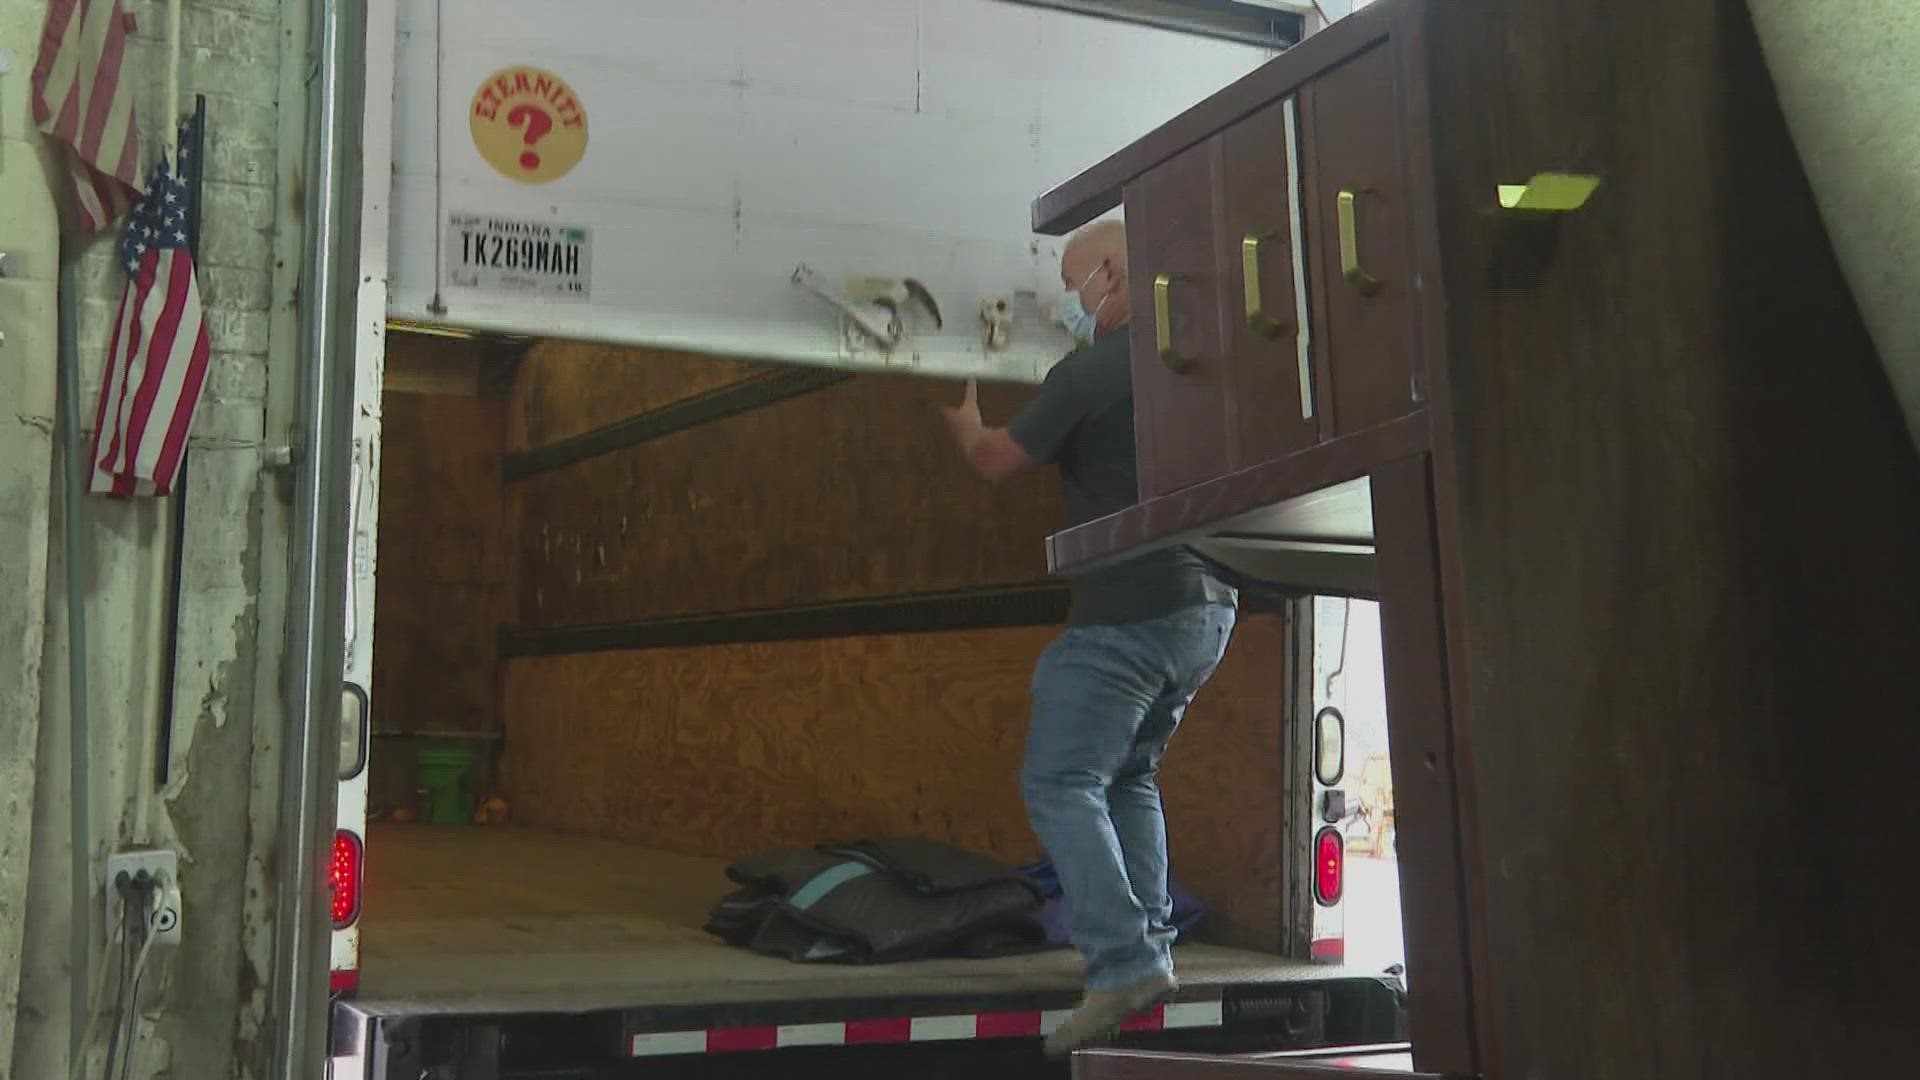 The state's two largest school districts are stepping up to help Hindman Elementary in Knott County. They are donating surplus desks, book cases and tables .